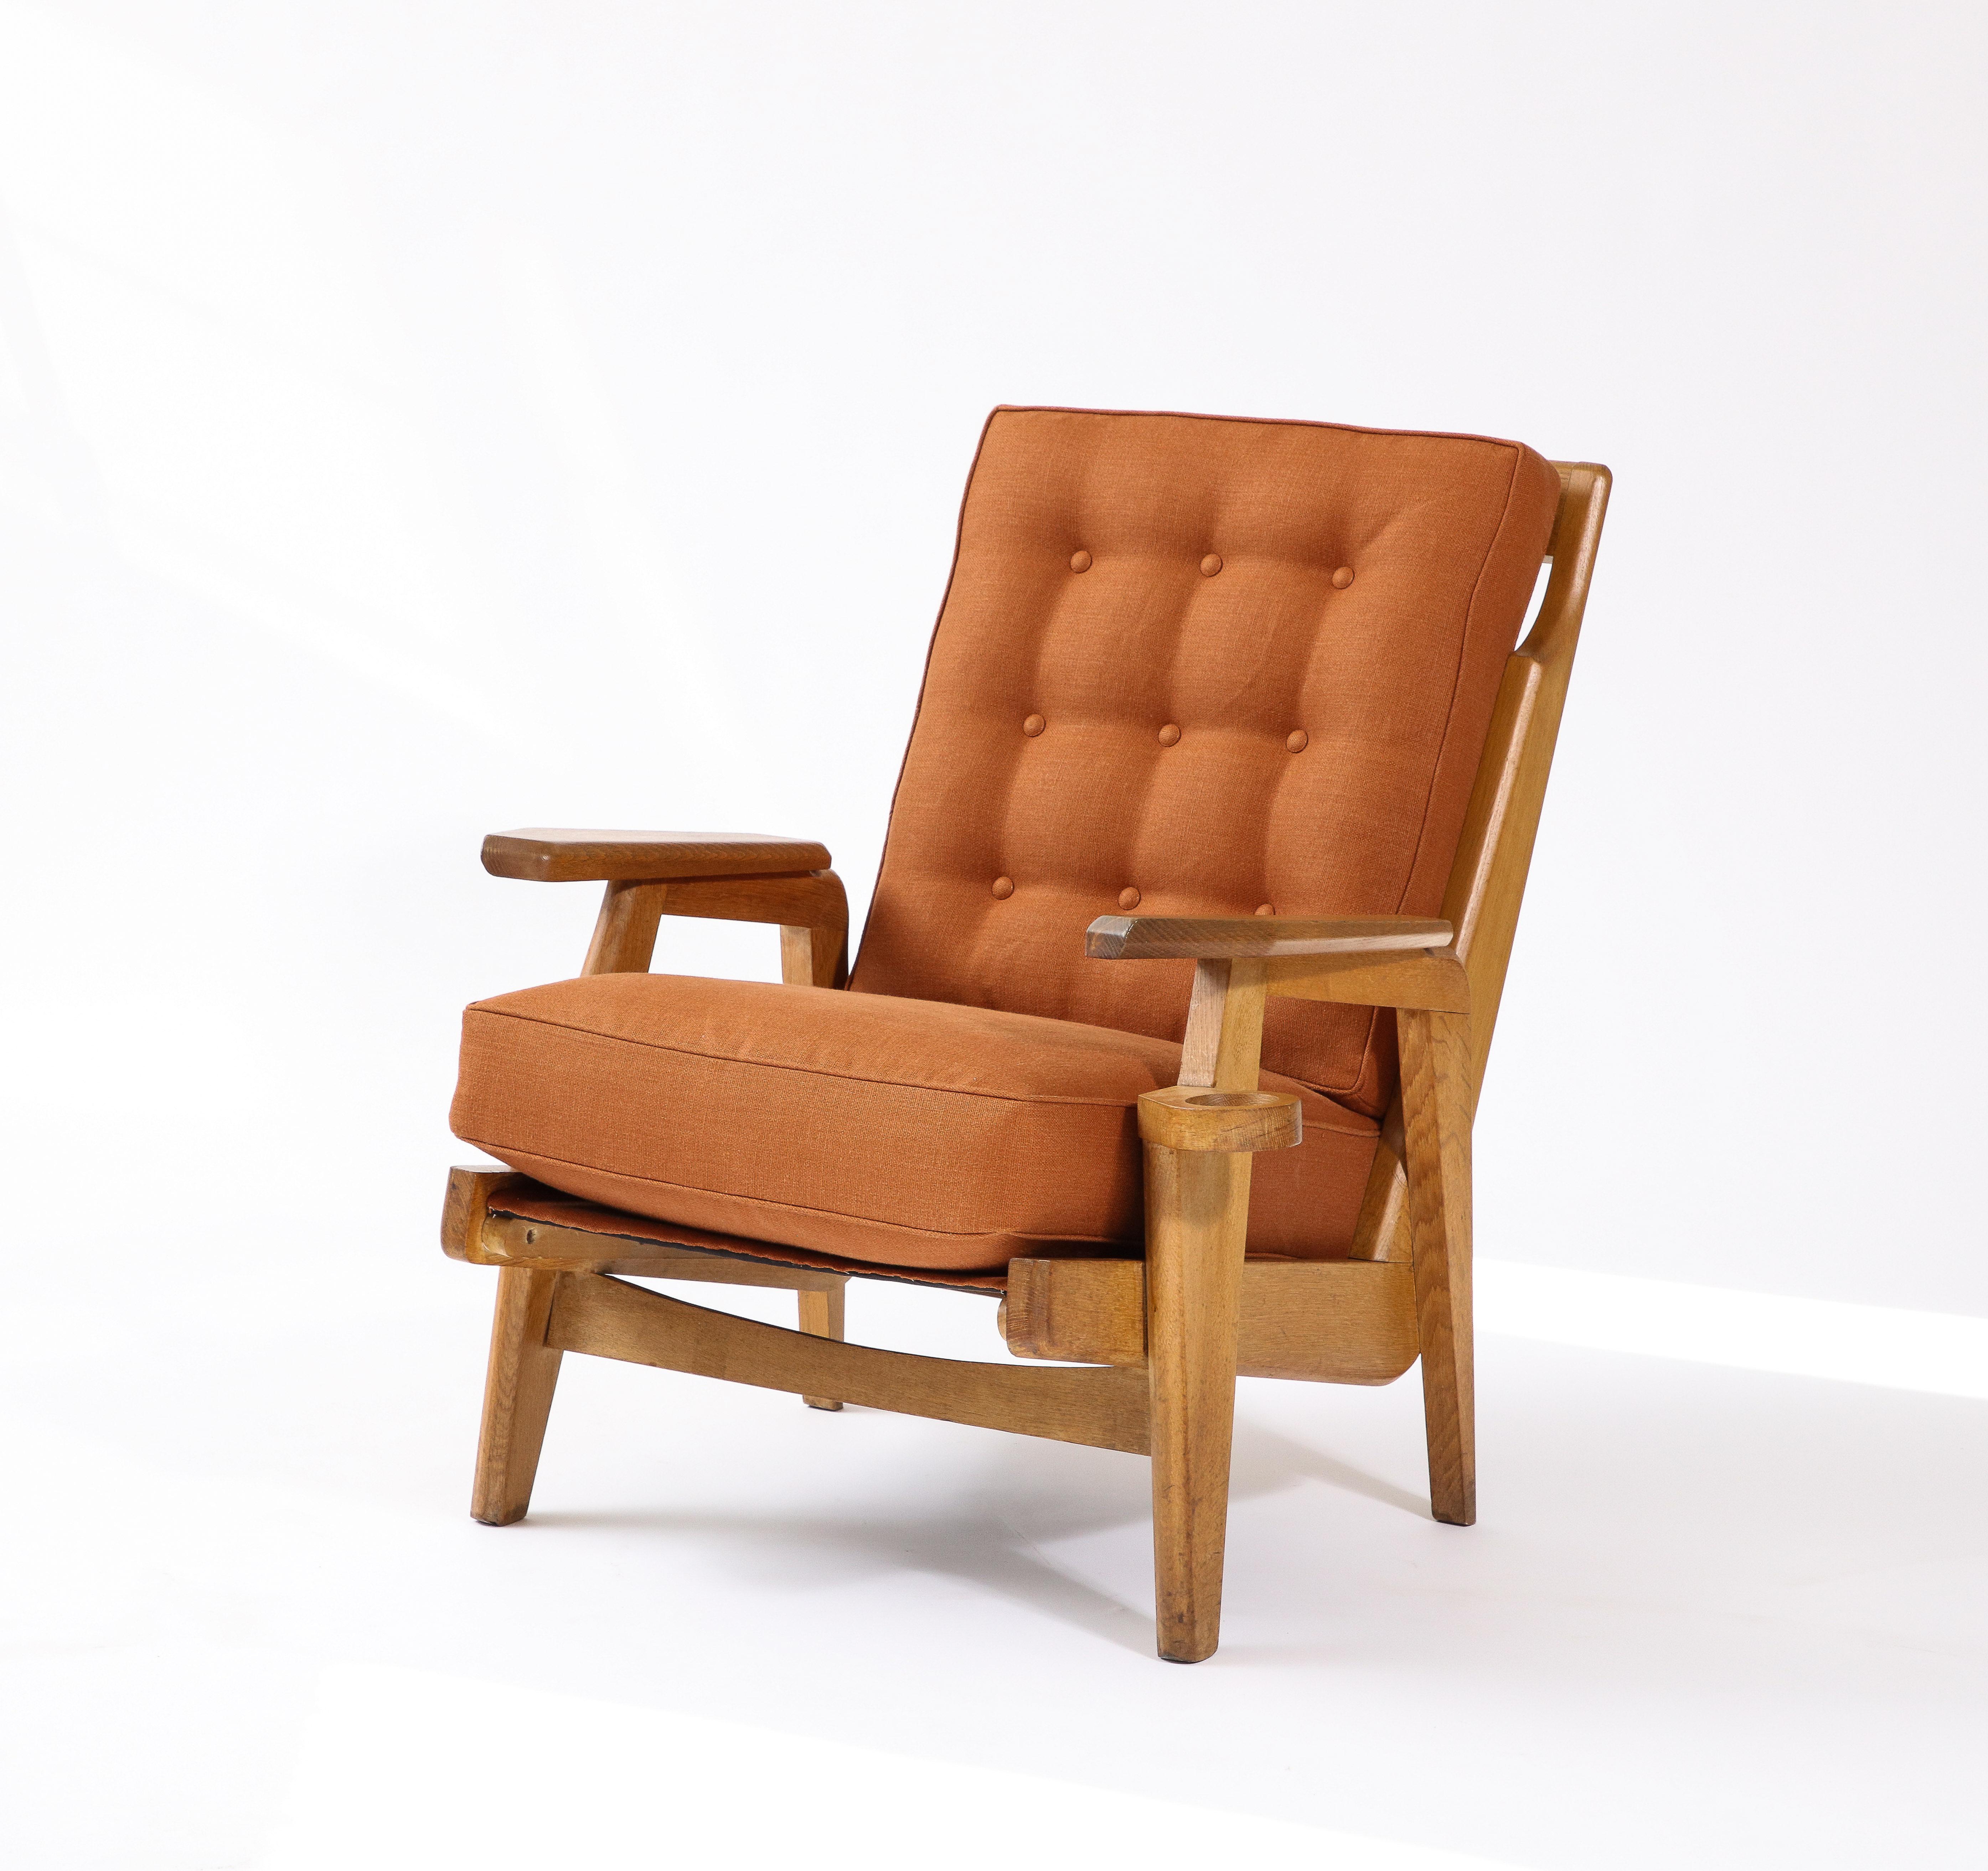 Mid-Century Modern Oak and Upholstery Armchair by Guillerme et Chambron, France, c. 1960